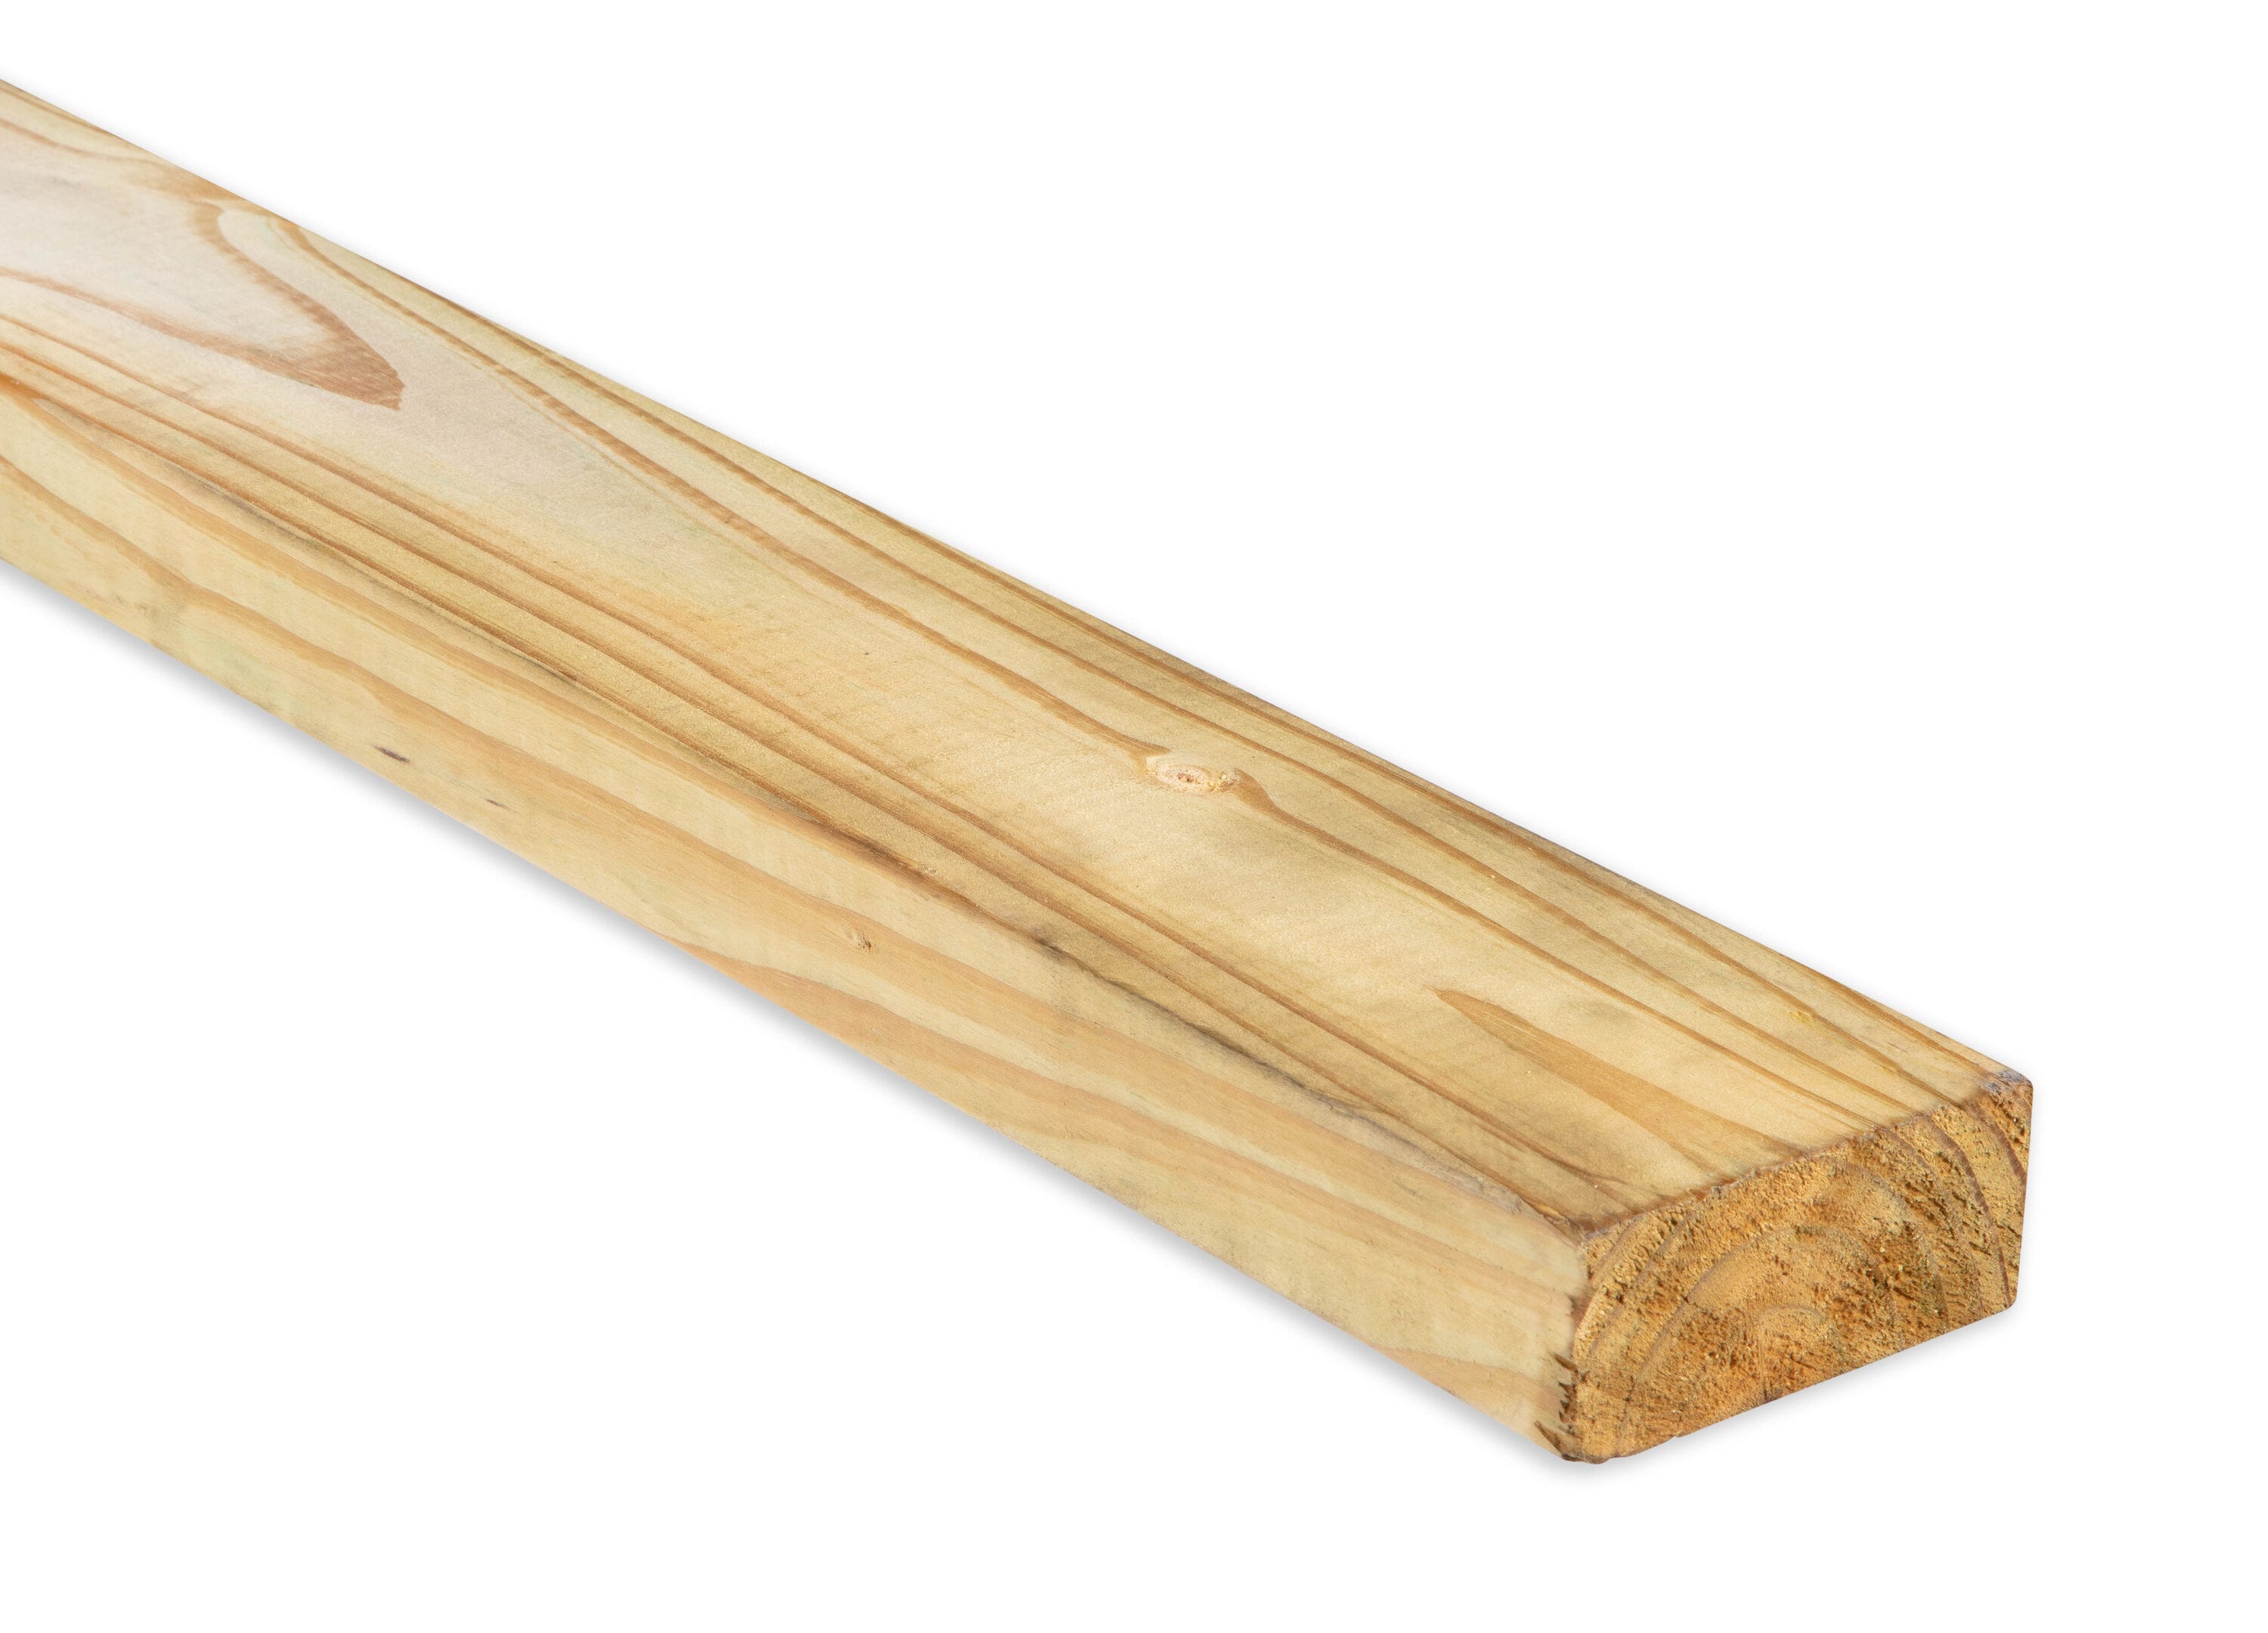 2x4 Clear KDAT Treated Lumber | Capitol City Lumber